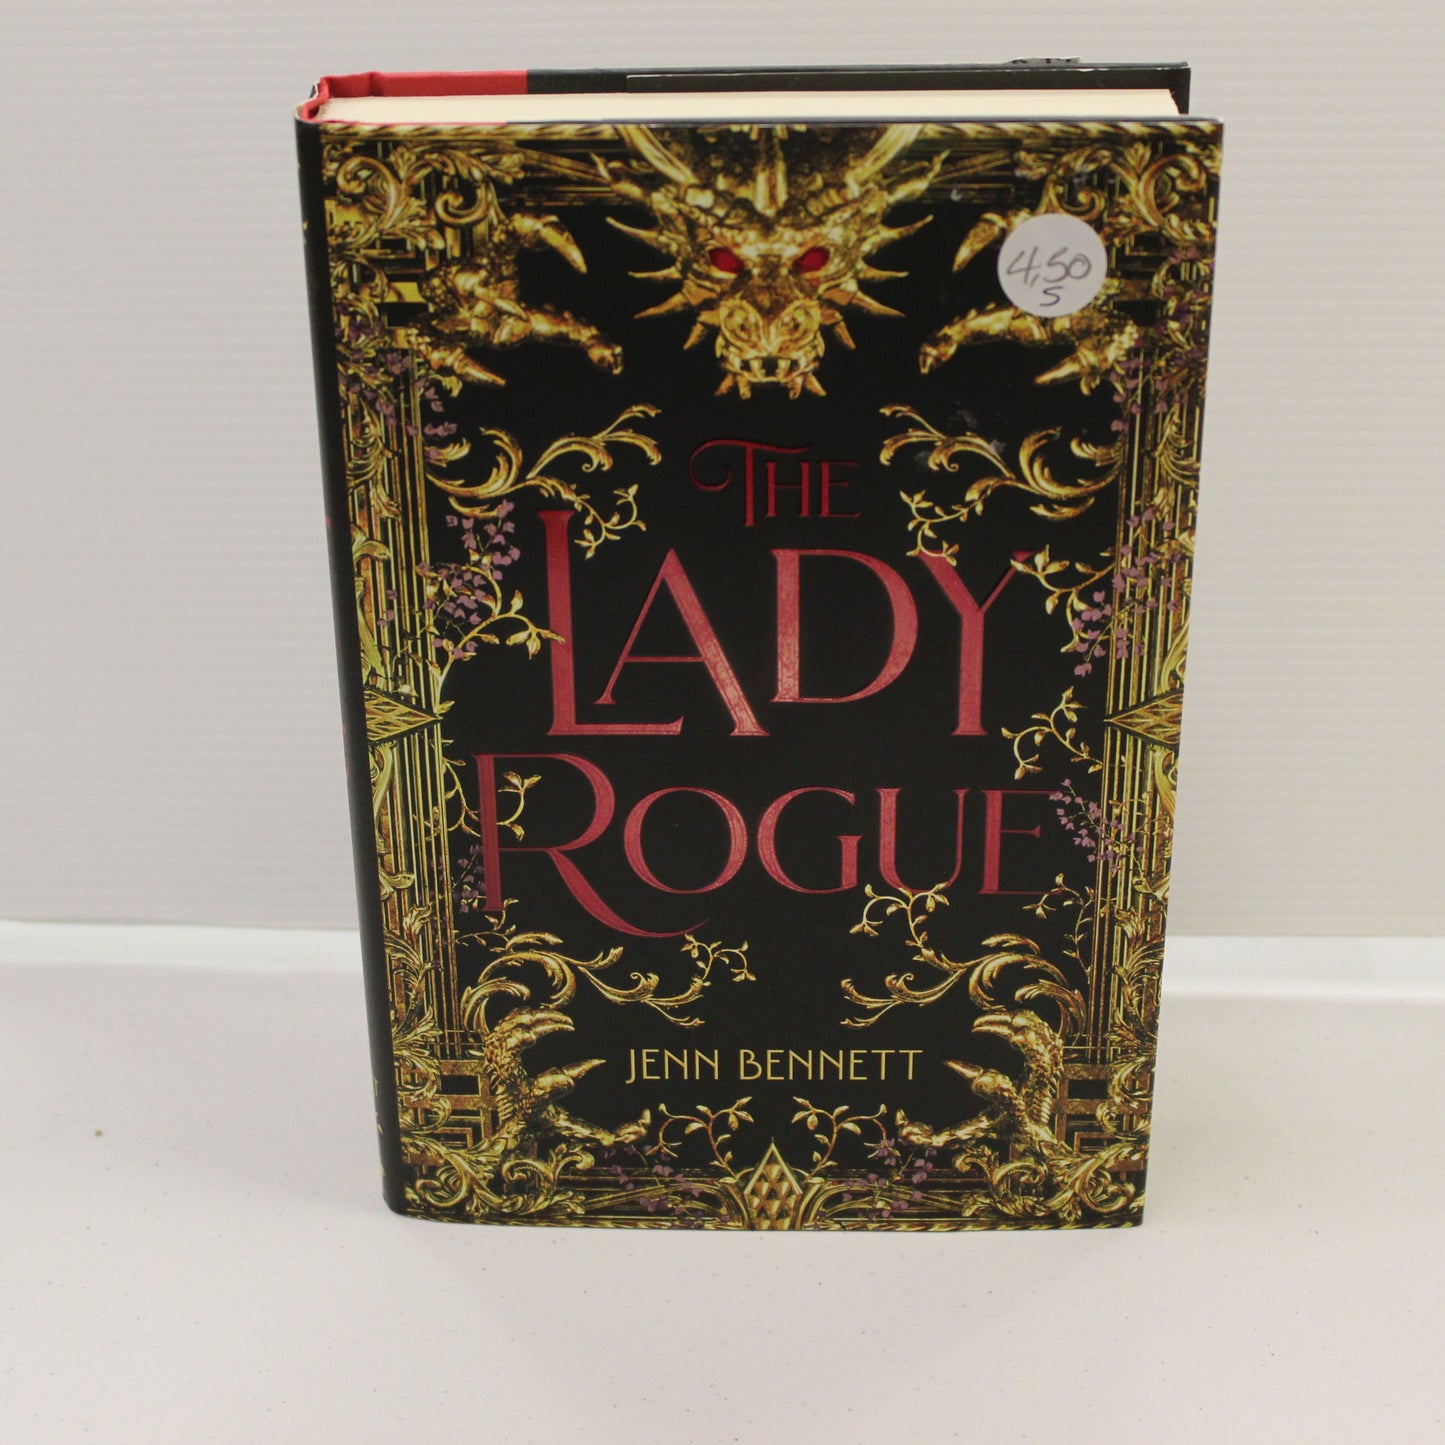 THE LADY ROUGUE